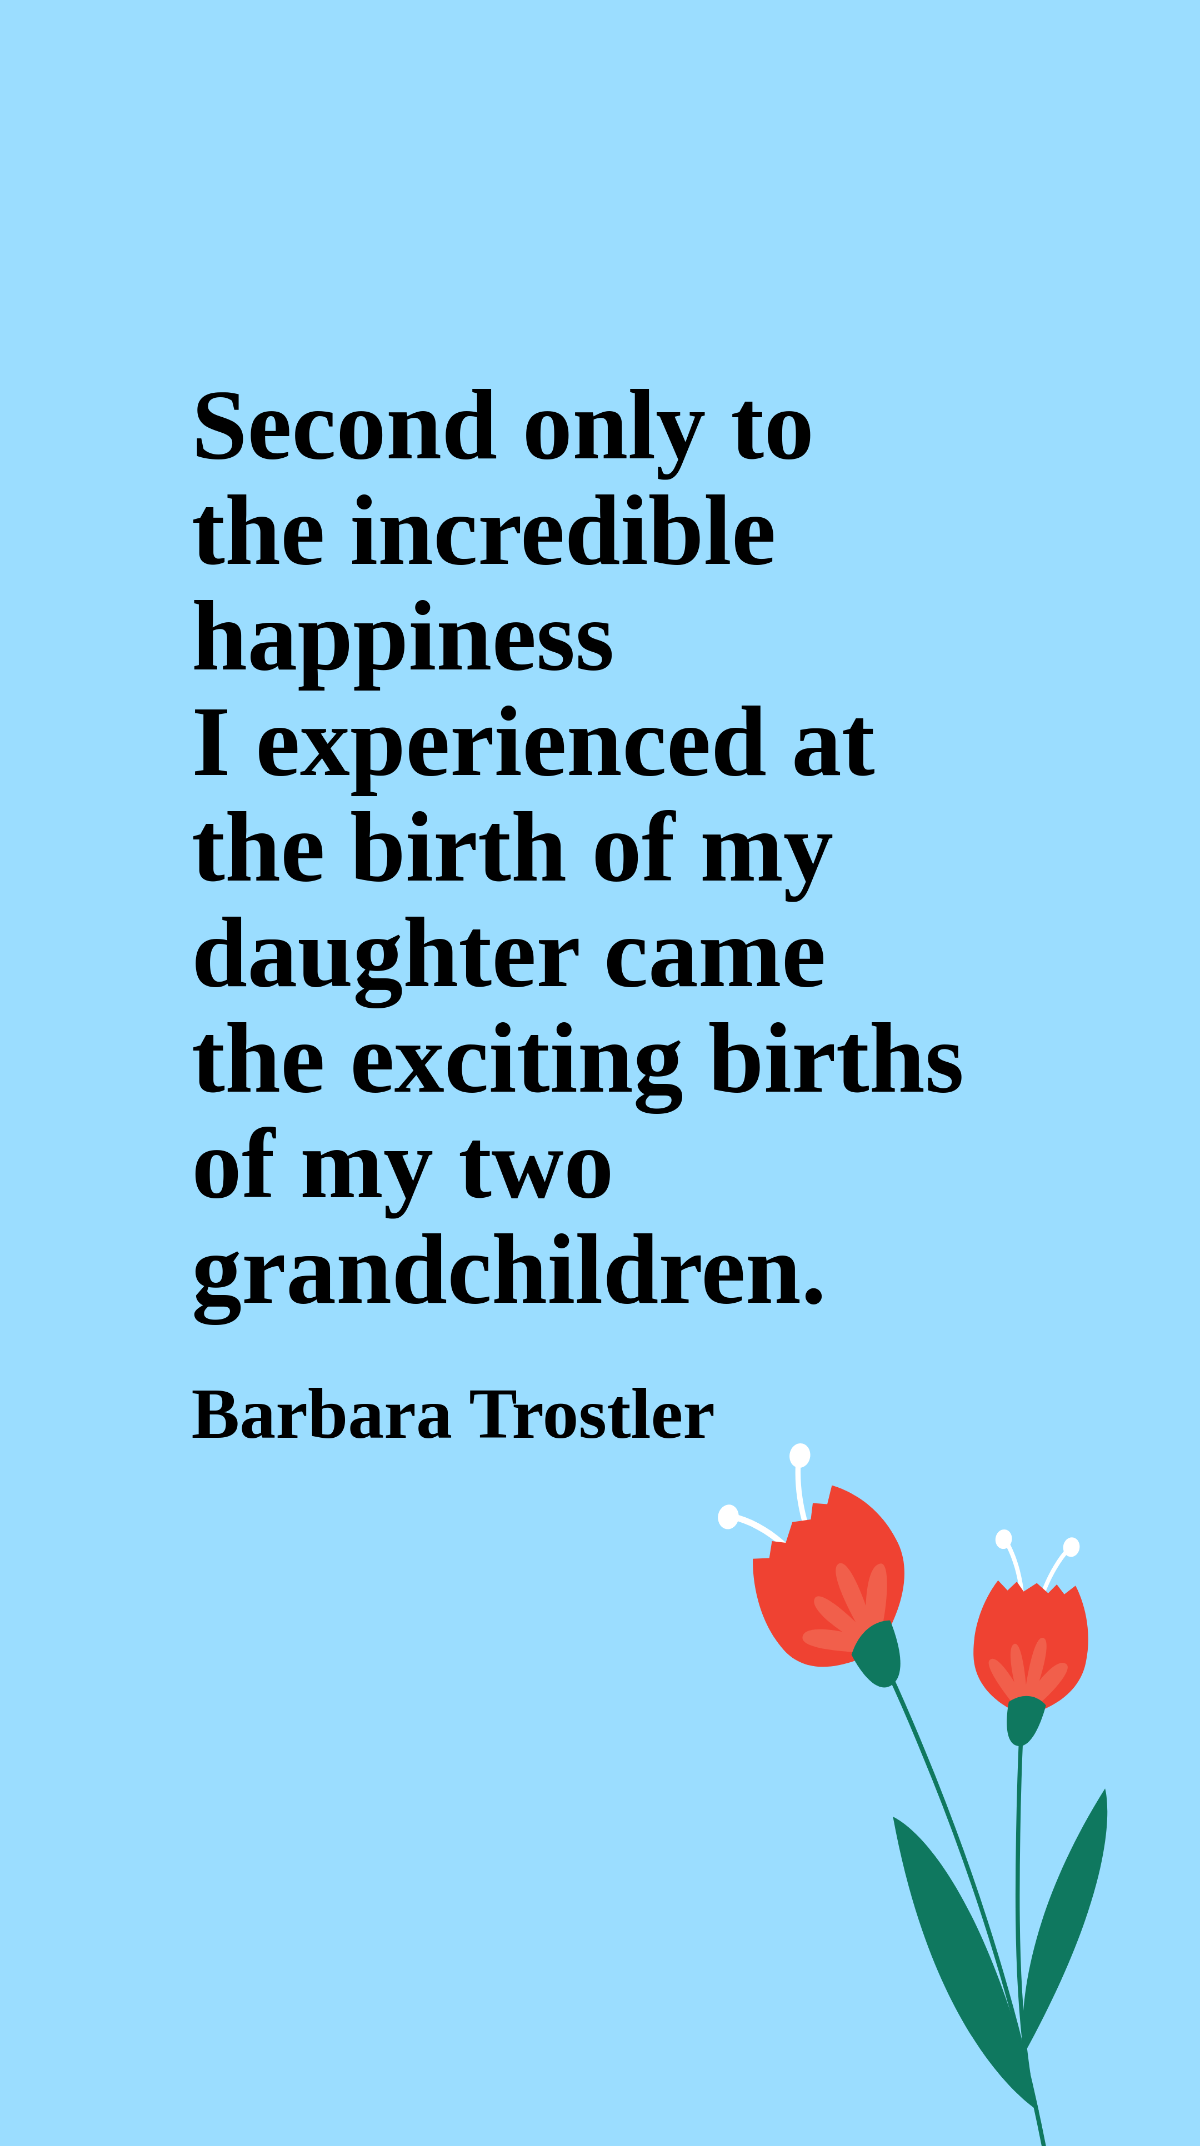 Free Barbara Trostler - Second only to the incredible happiness I experienced at the birth of my daughter came the exciting births of my two grandchildren. Template